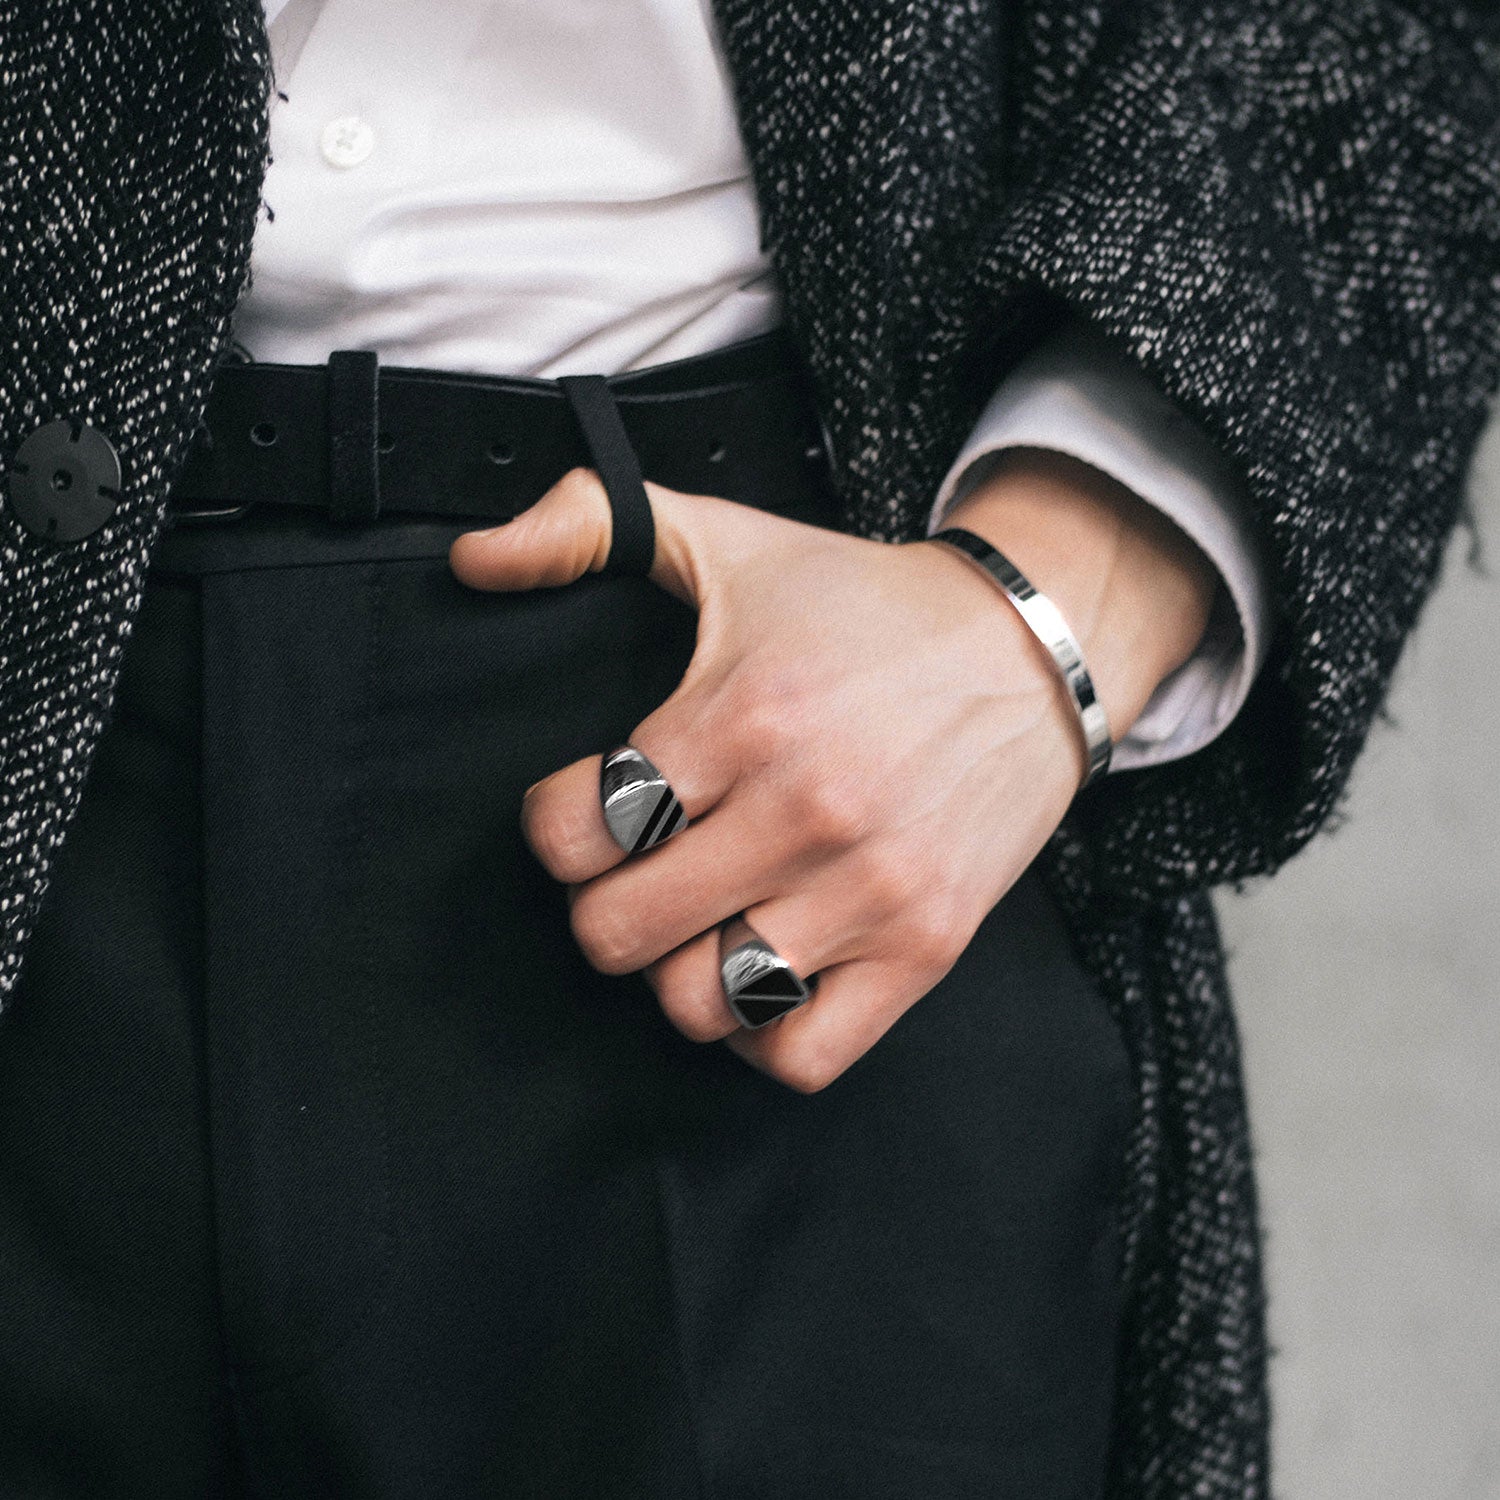 WEARING BRACELETS ISN’T AS FEMININE AS YOU THINK; HERE’S THE MASCULINE WAY TO DO IT